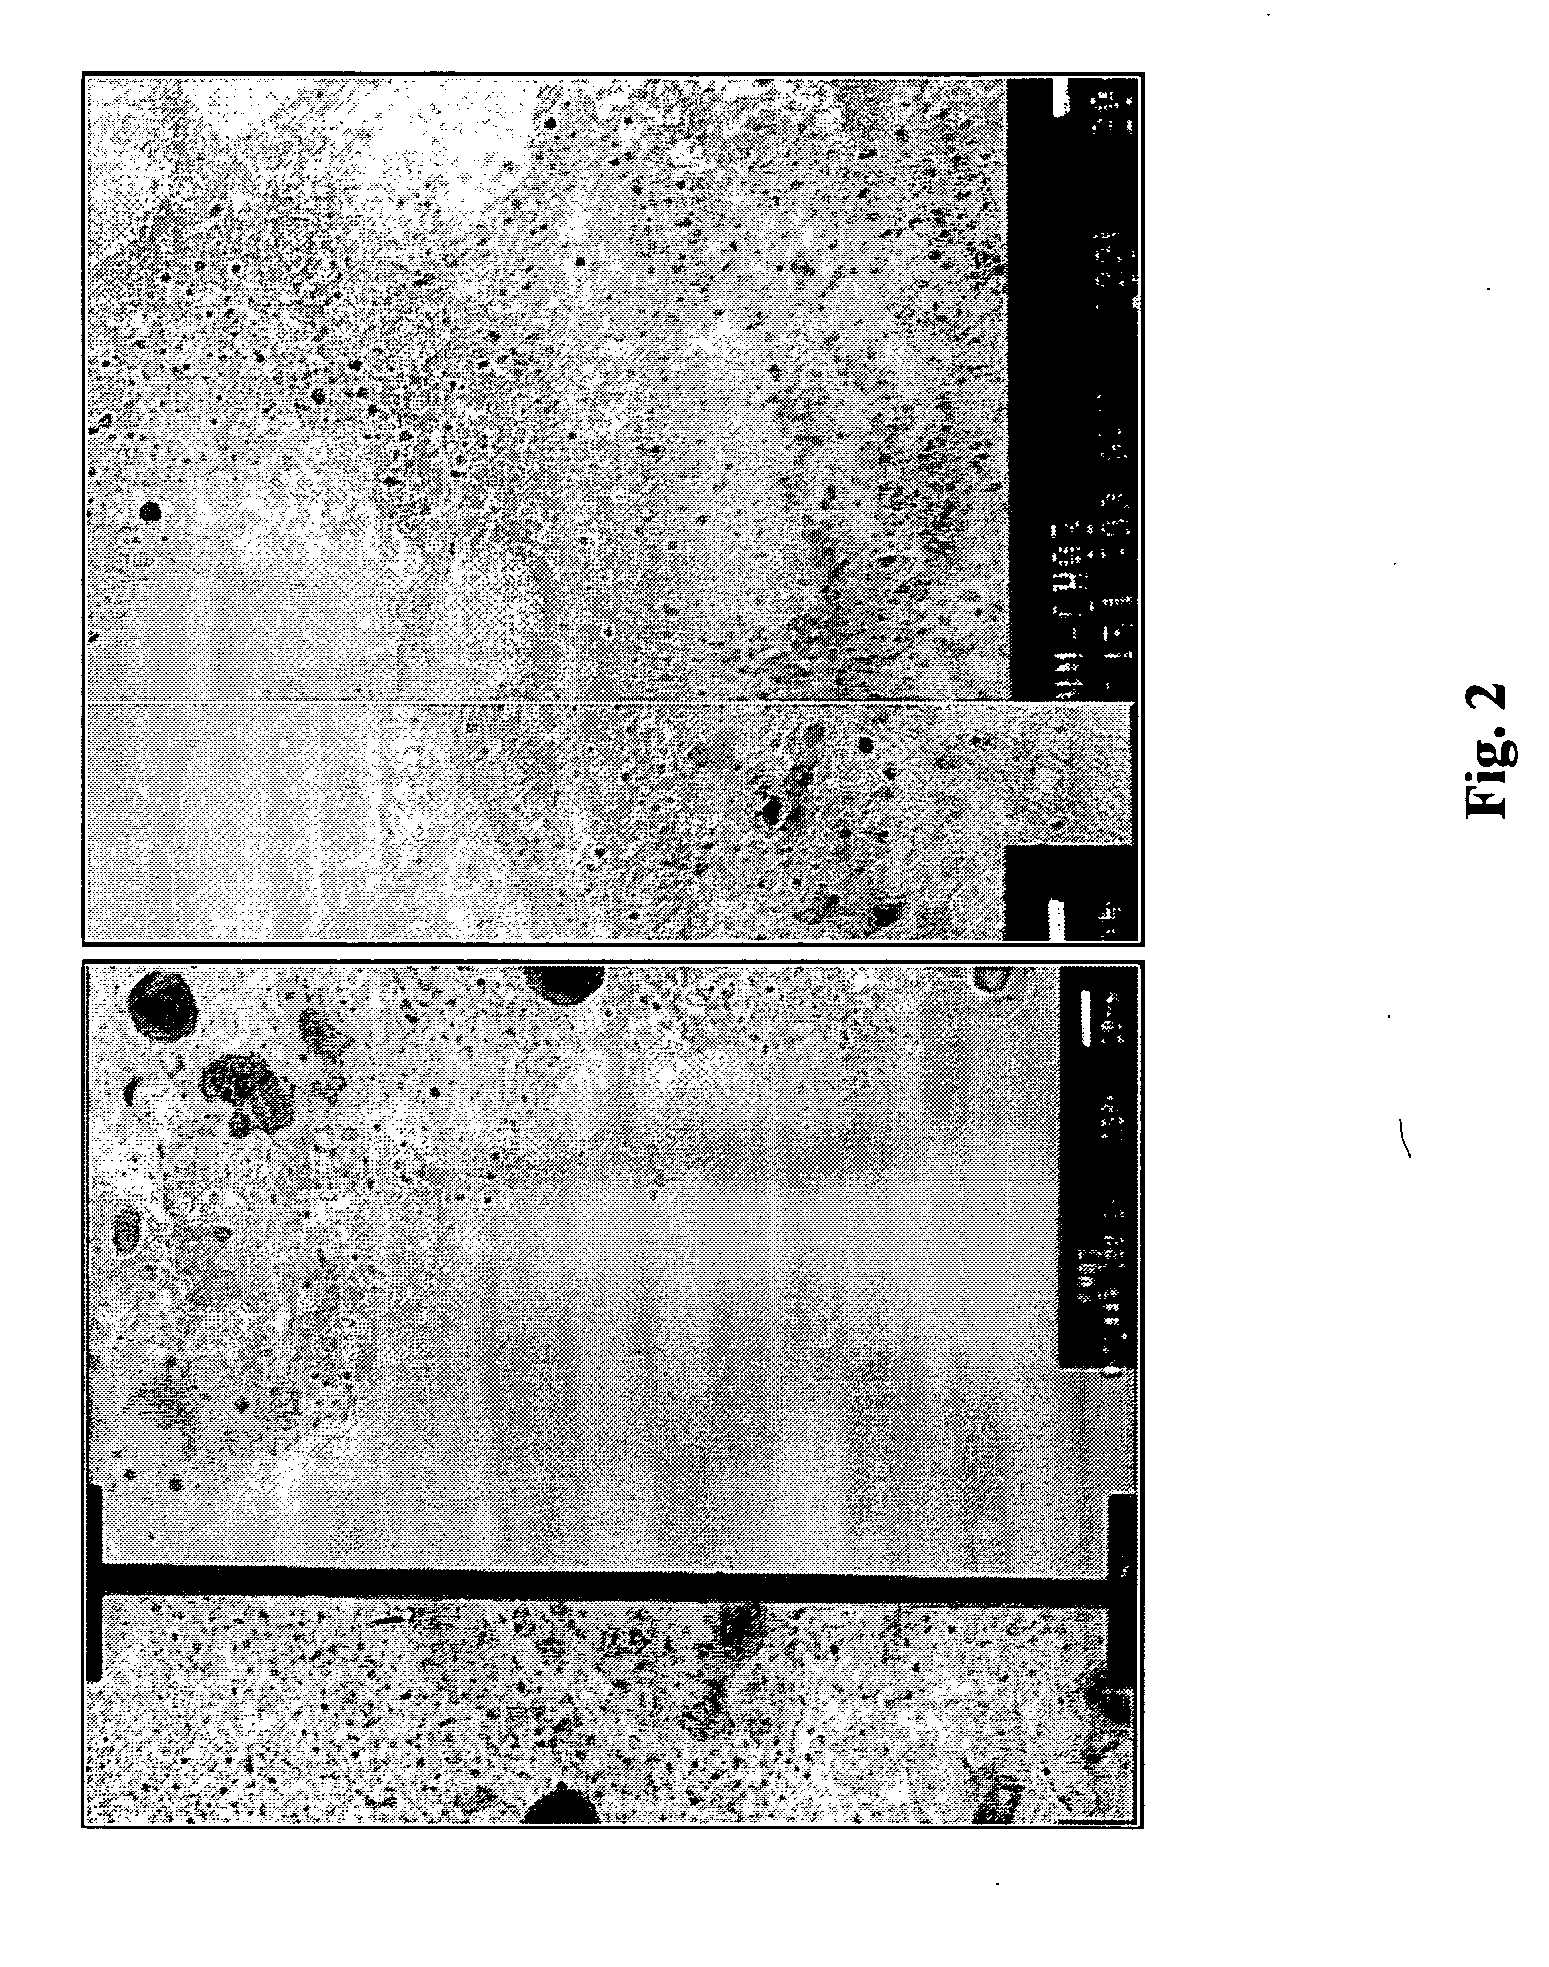 Carbon nanotube pastes and methods of use